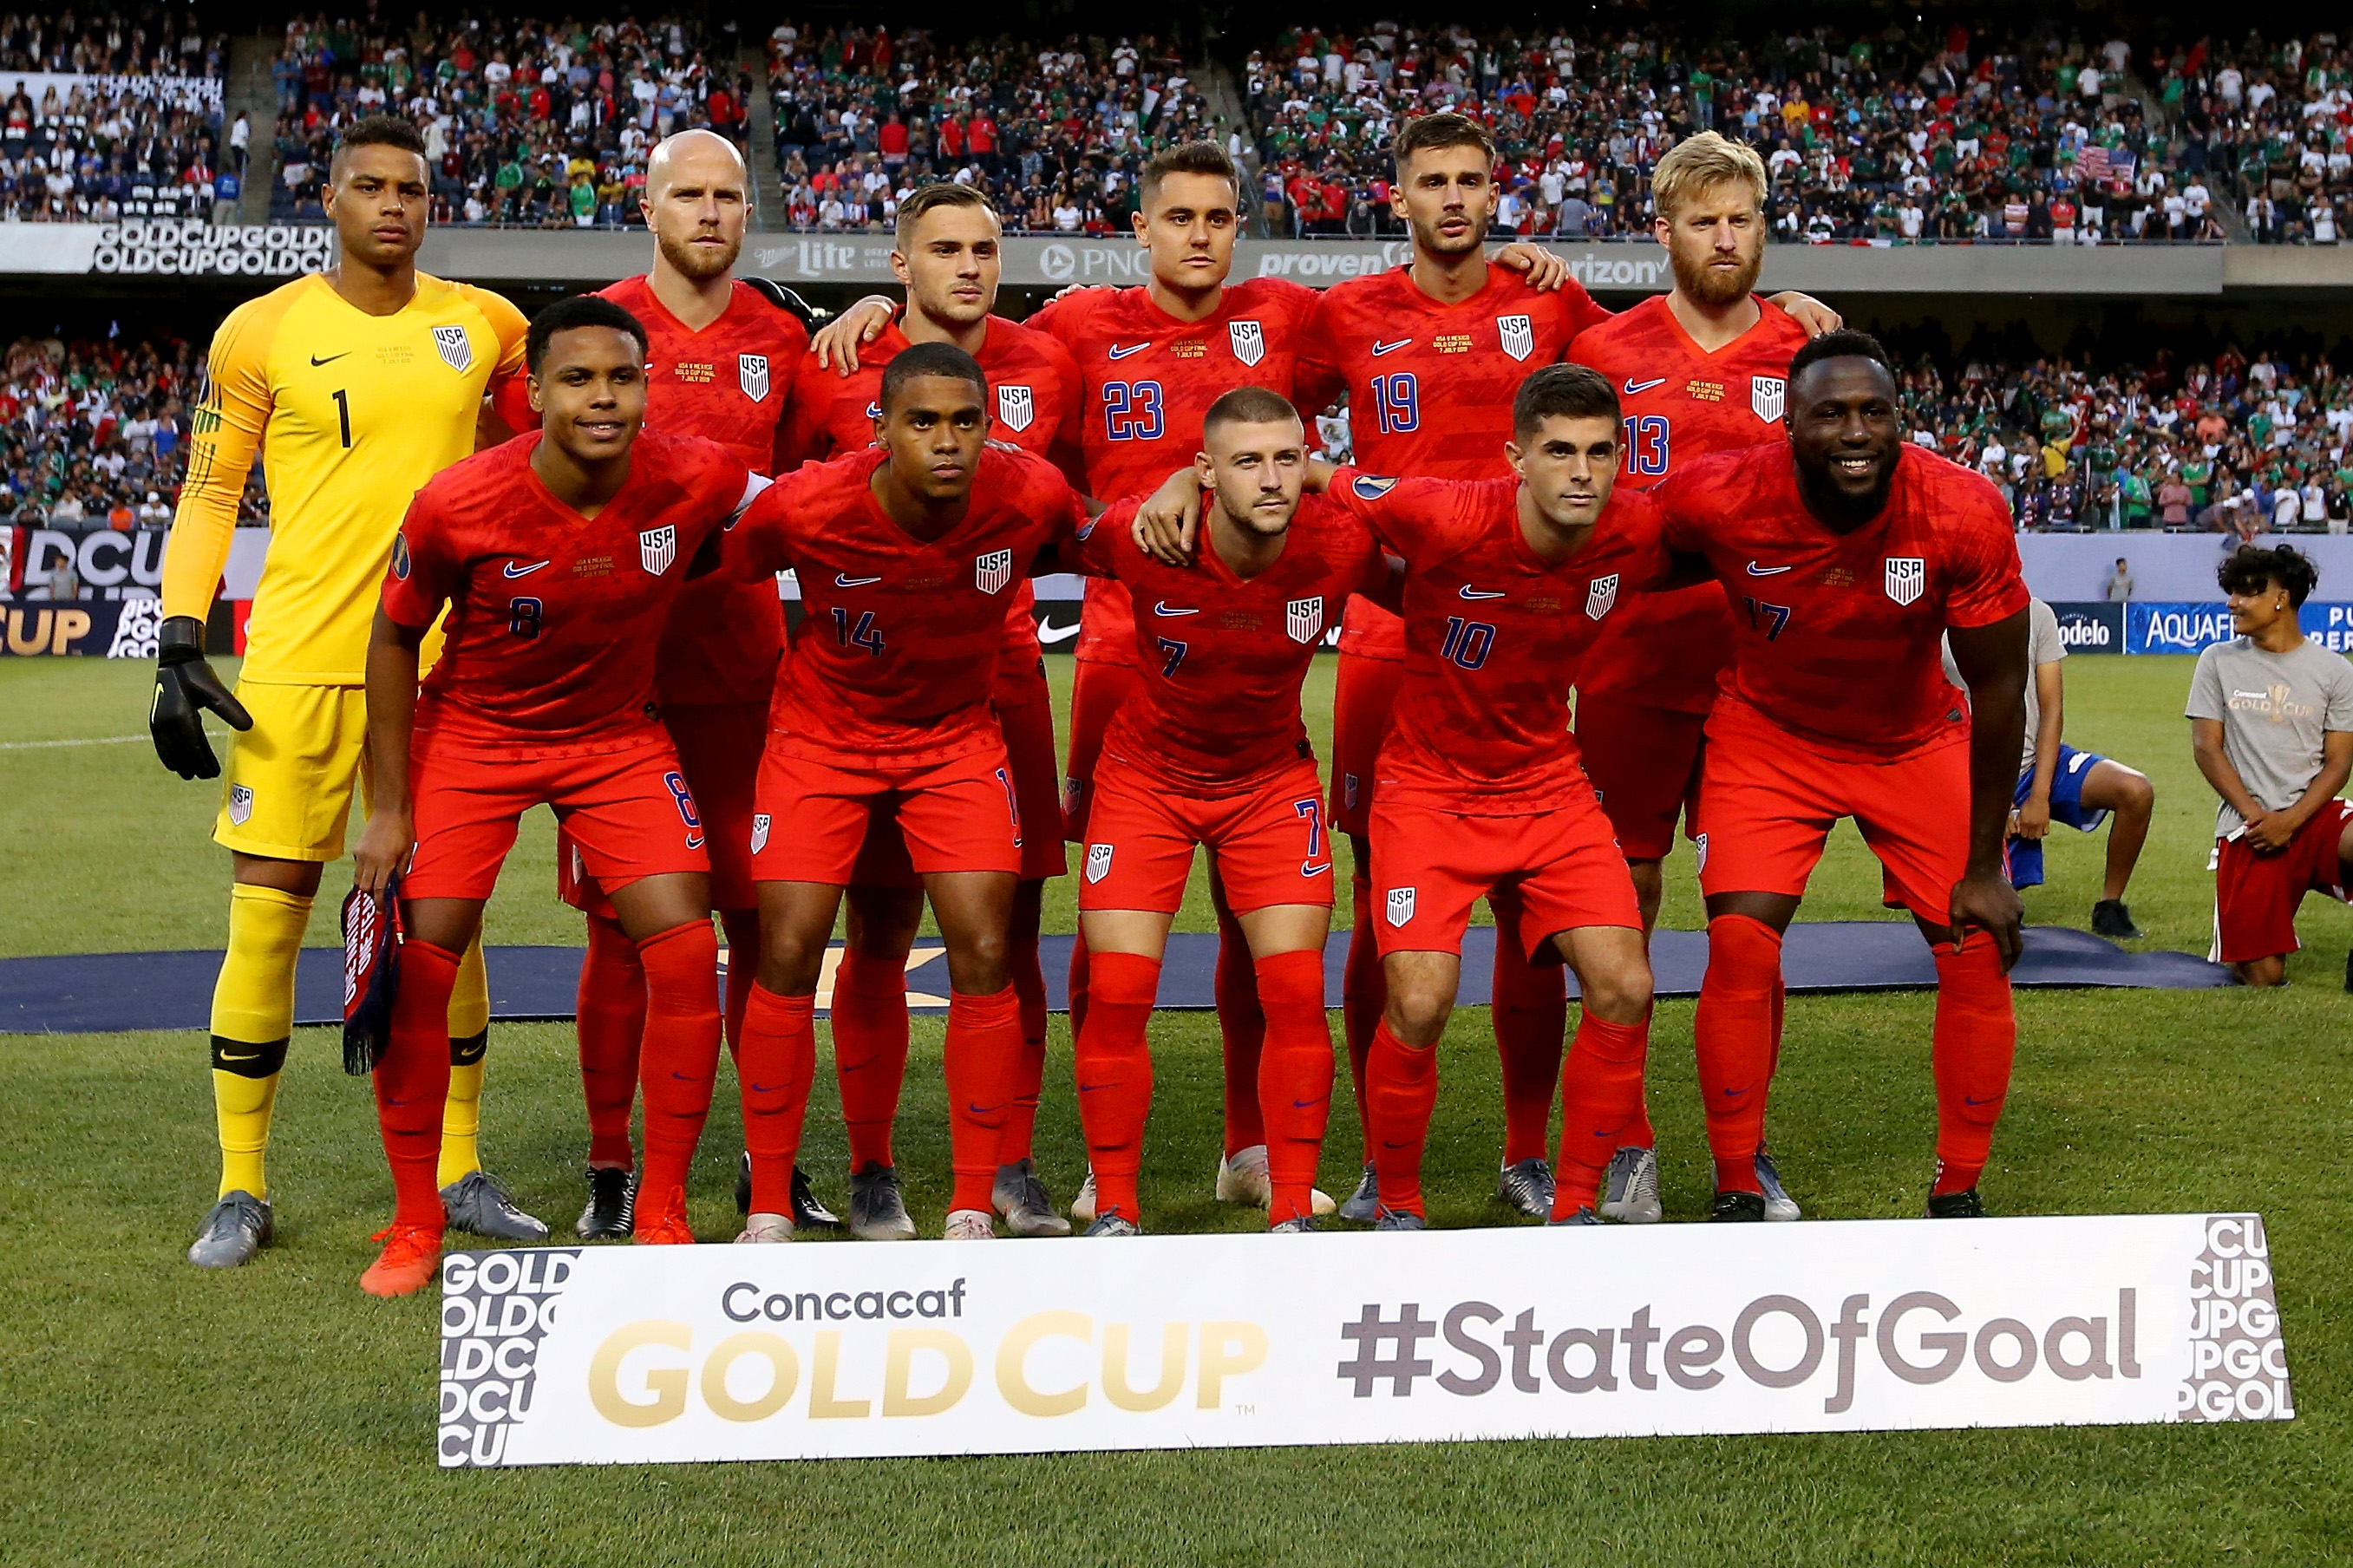 How To Watch Gold Cup 2021 In U.S. (TV, Streaming Guide)